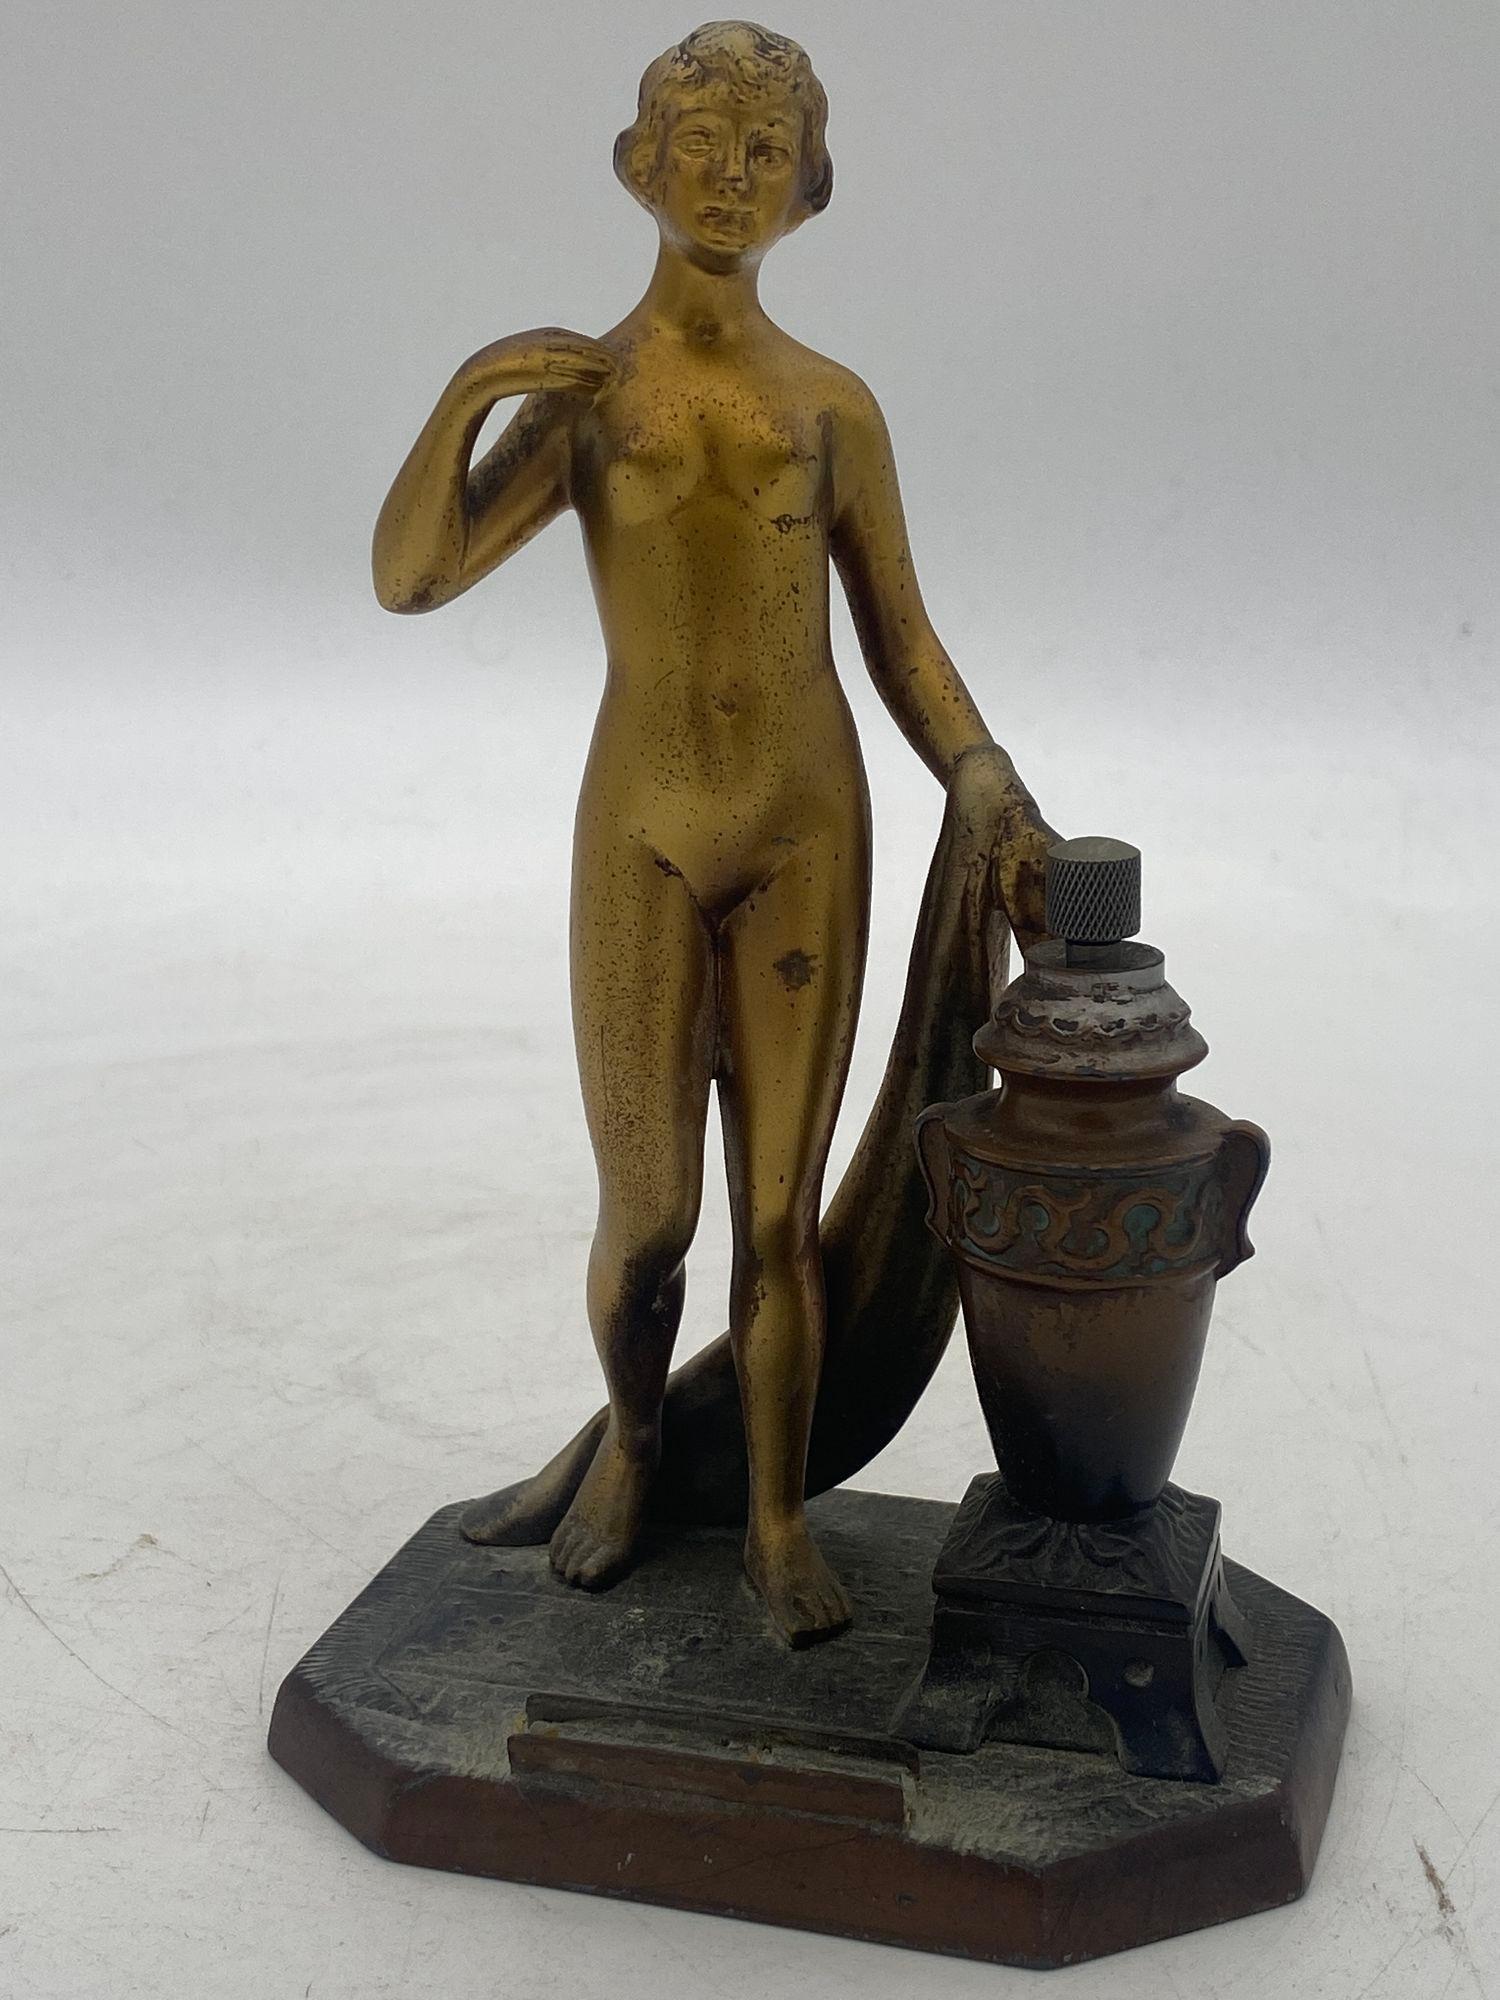 Nude Greek Goddess spelter metal torch tip table lighter featuring a nude flapper gilded in bronze. The urn next to her contains the oil and striker with the holder for the flit in fort.

Circa 1930